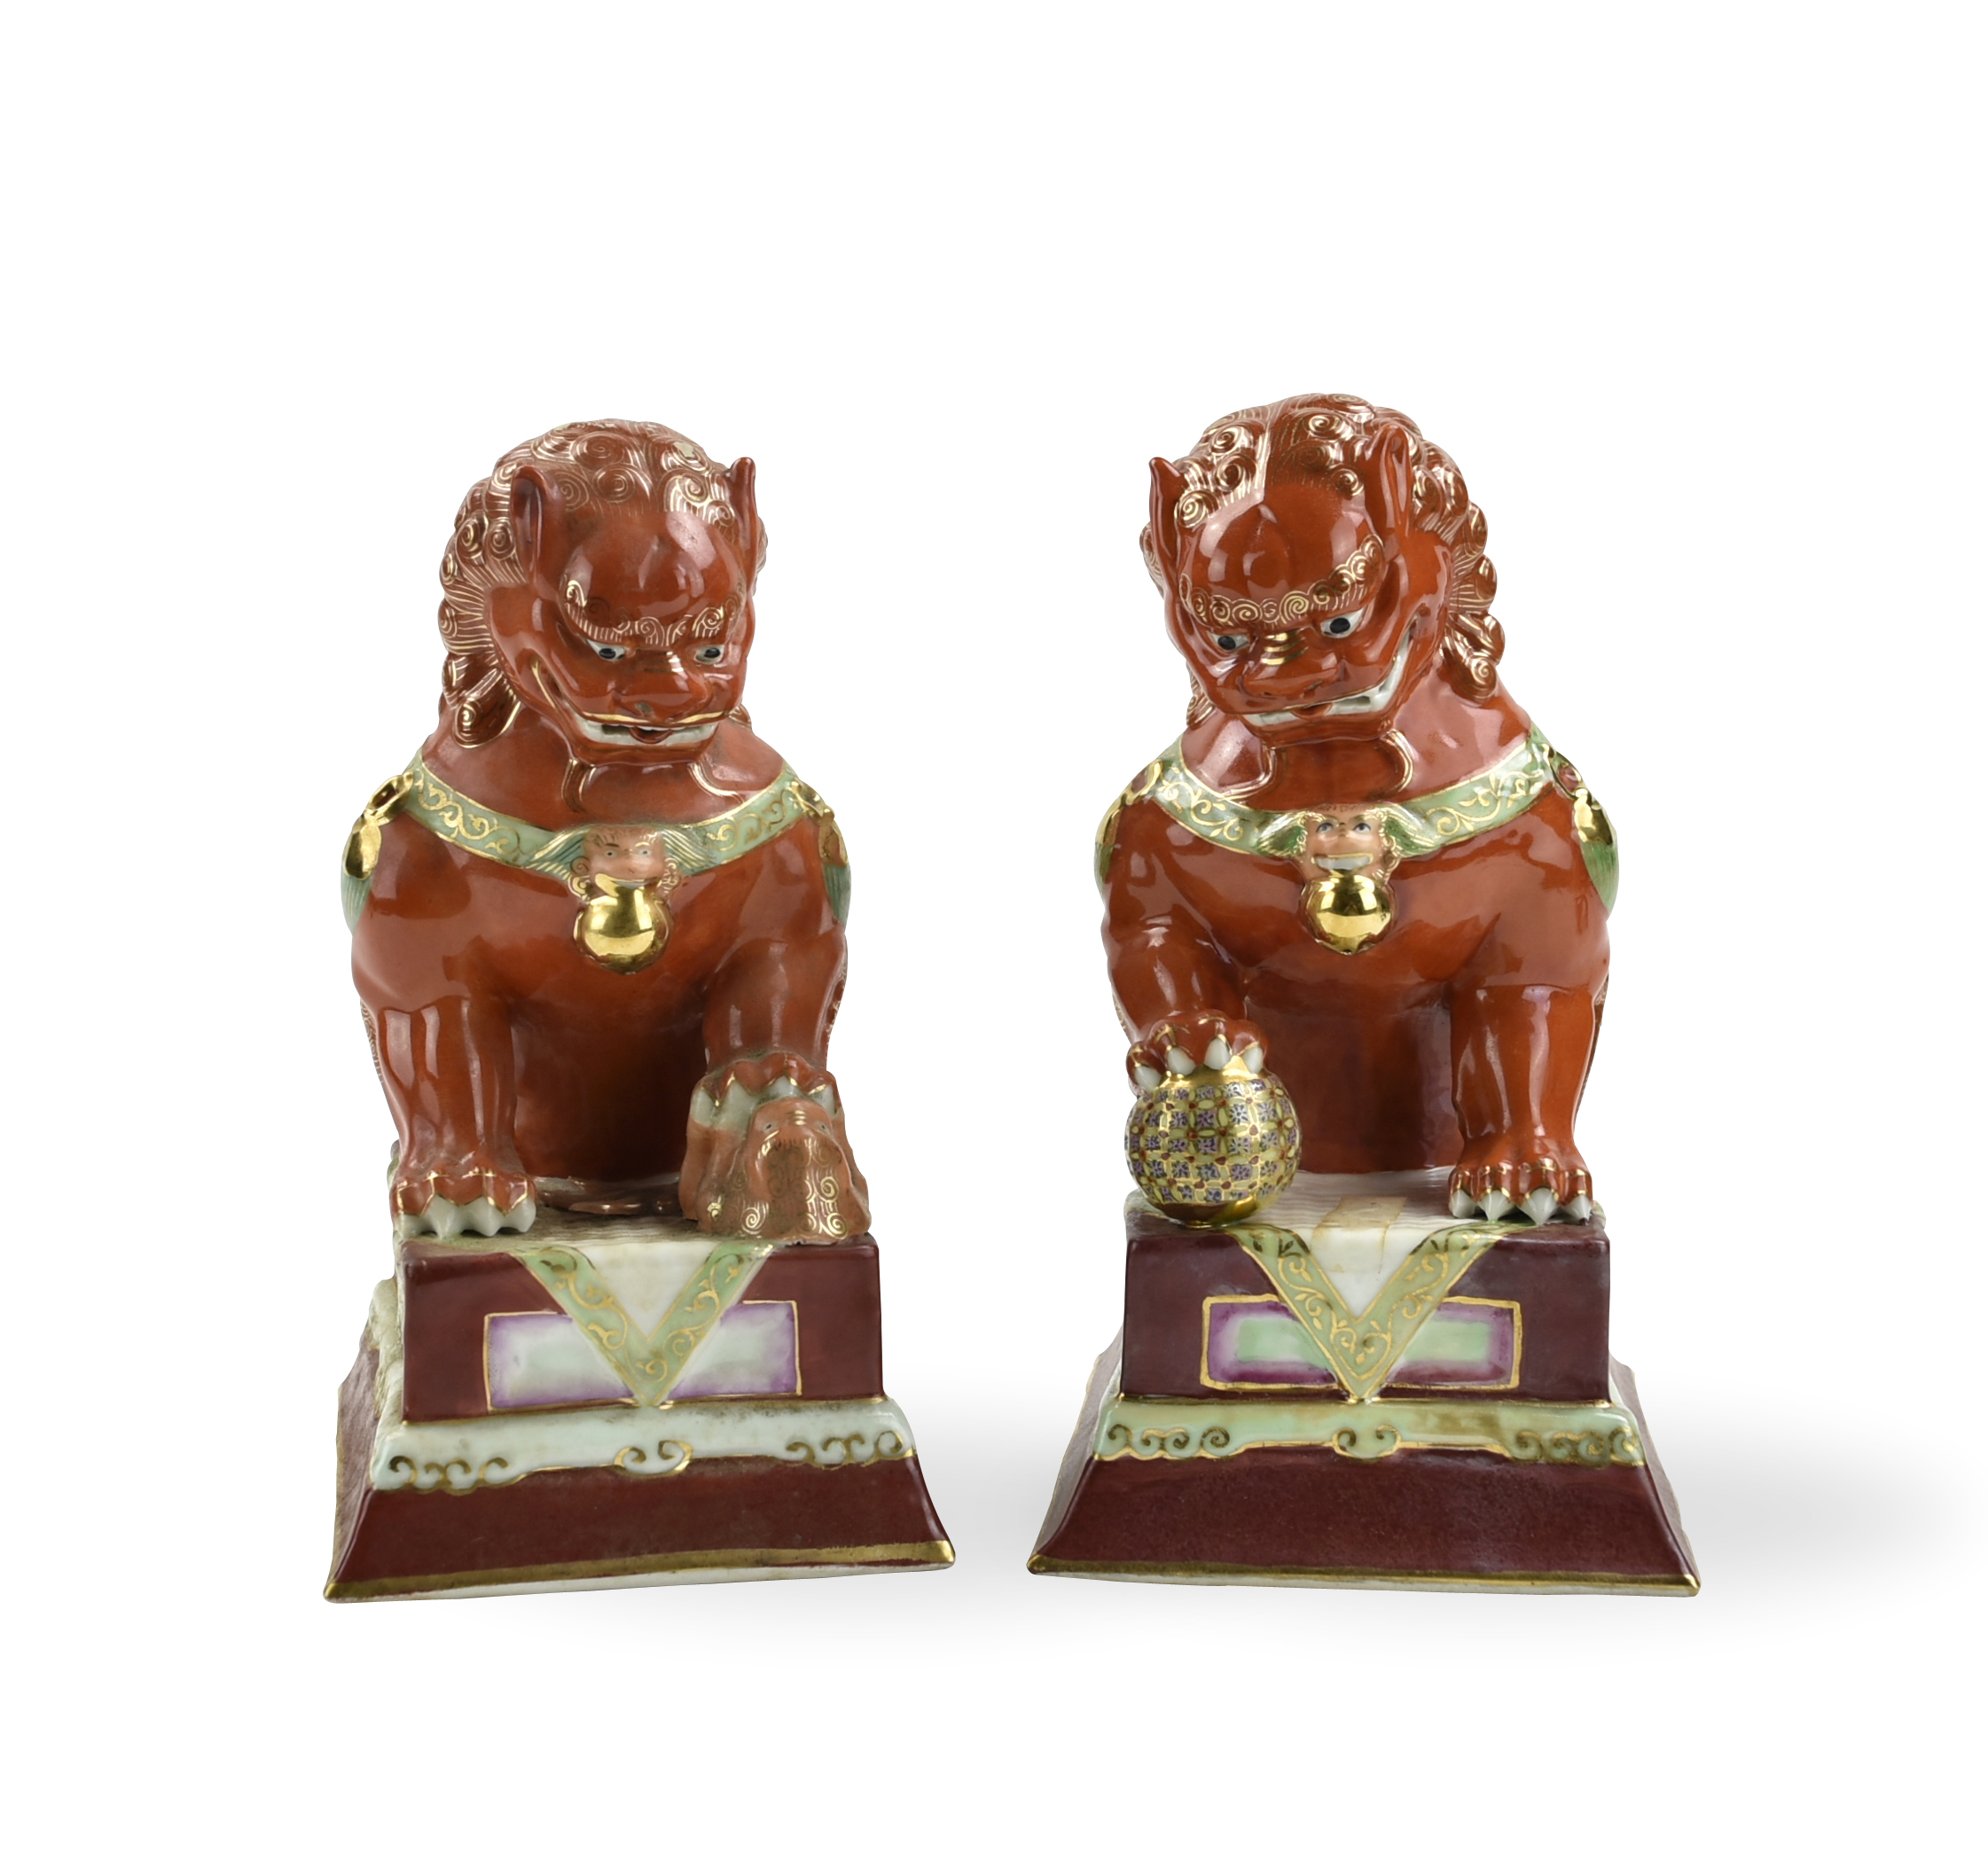 PAIR OF CHINESE PORCELAIN LIONS 20TH 339472